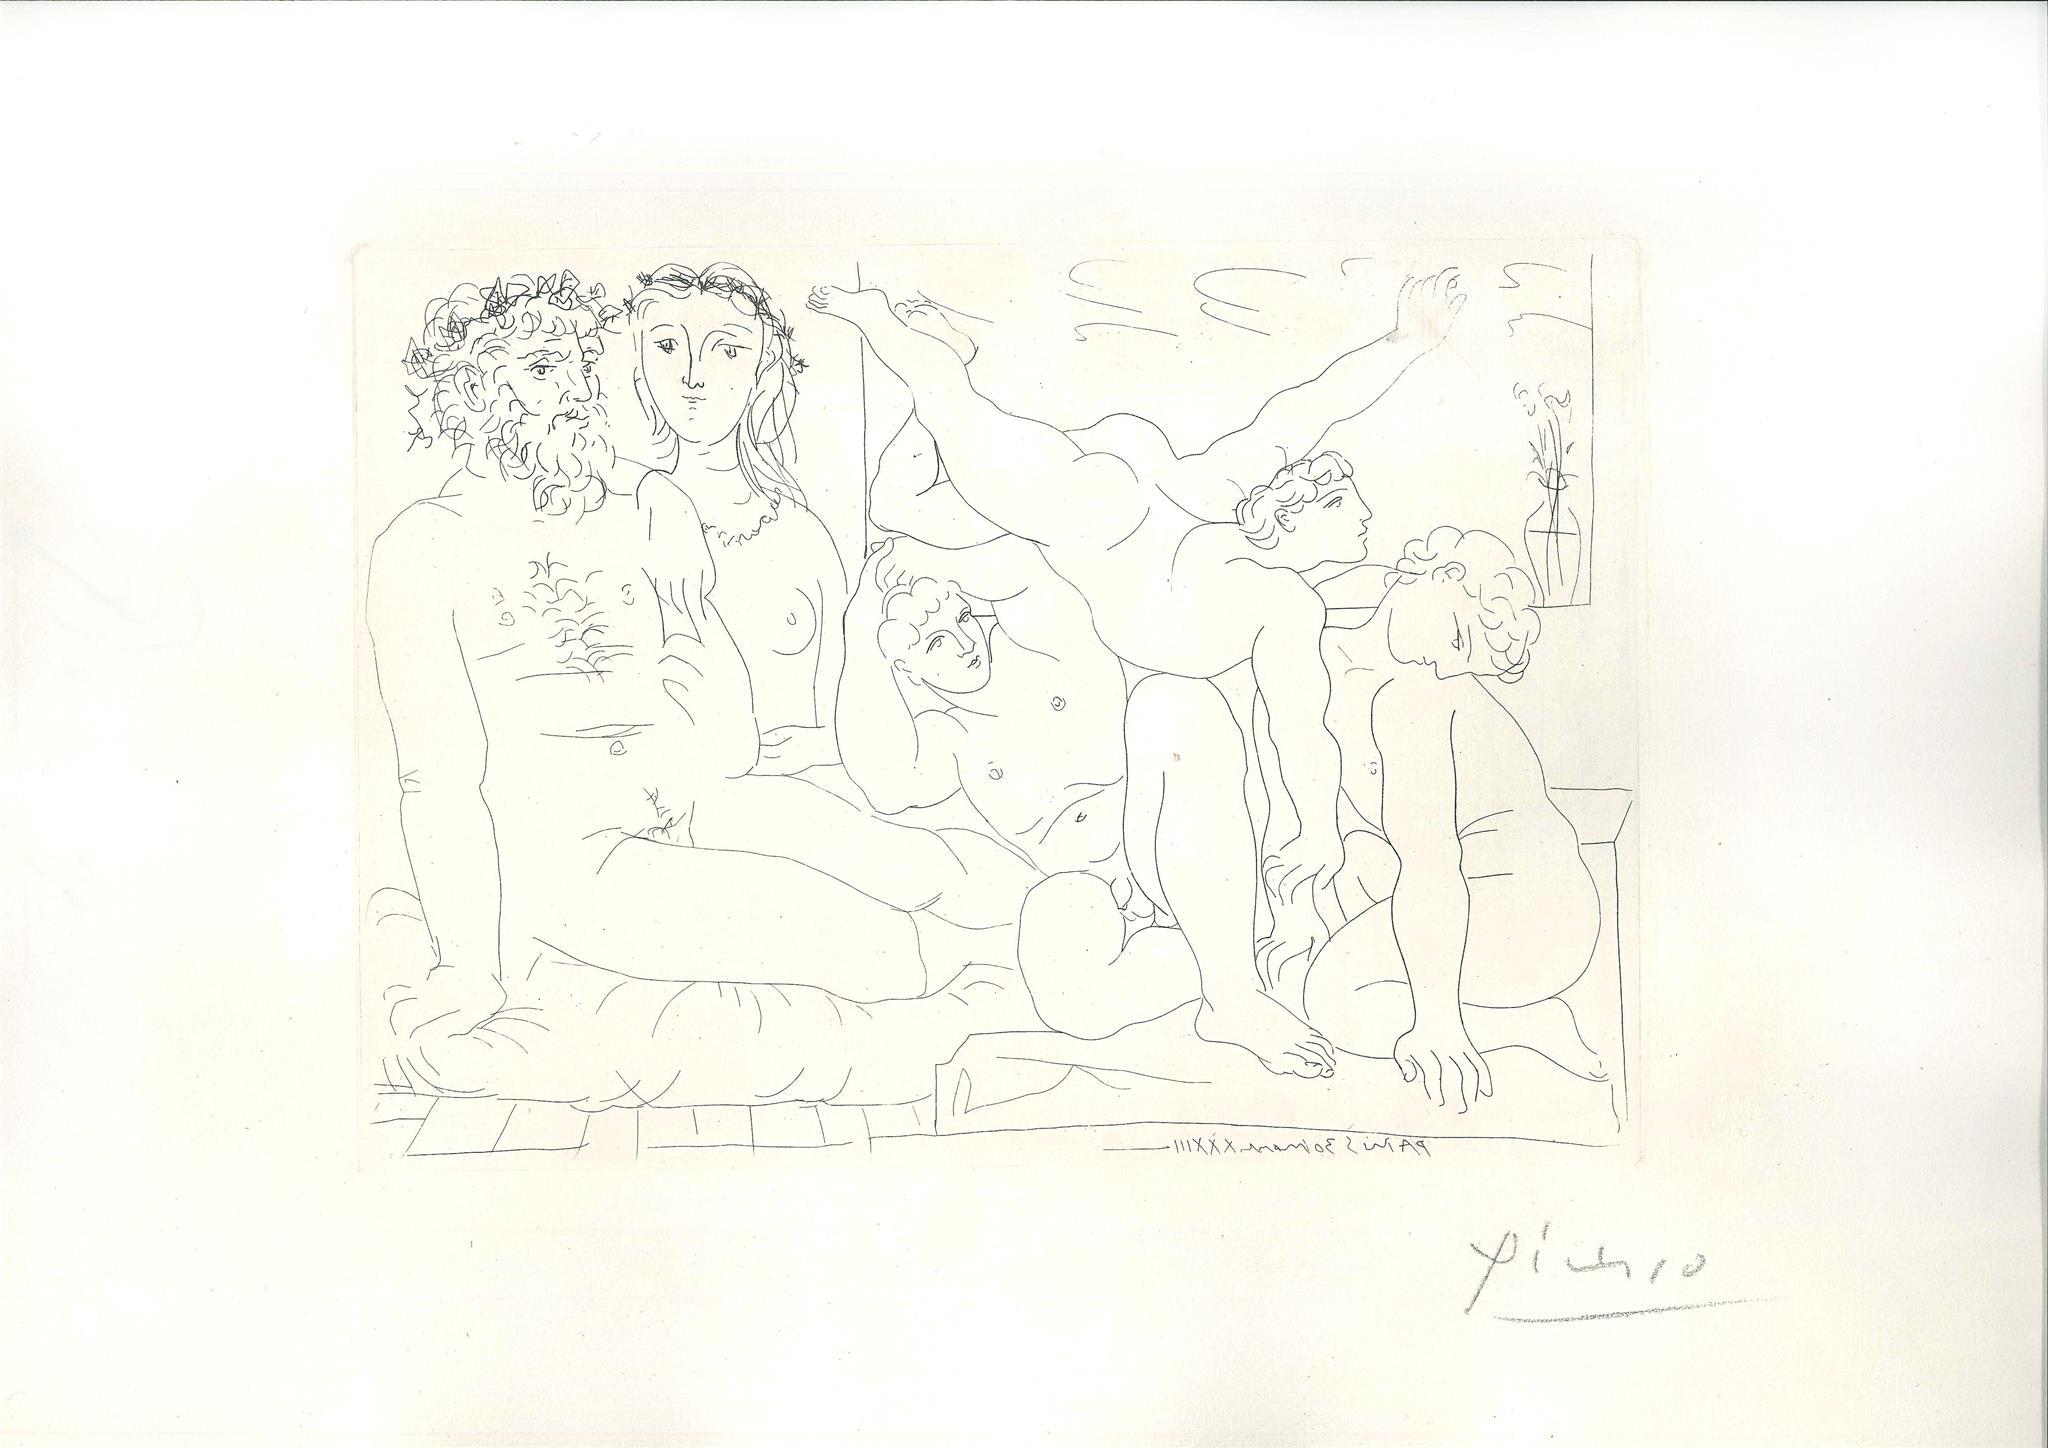 Famille de Saltimbanques is an original etching realized by Pablo Picasso in 1933. Hand signed in pencil on lower right margin and dated on plate "Paris 30 mars XXXIII". II state on 2 (II/II), belonging to the Suite Vollard, printed by Lacourière in